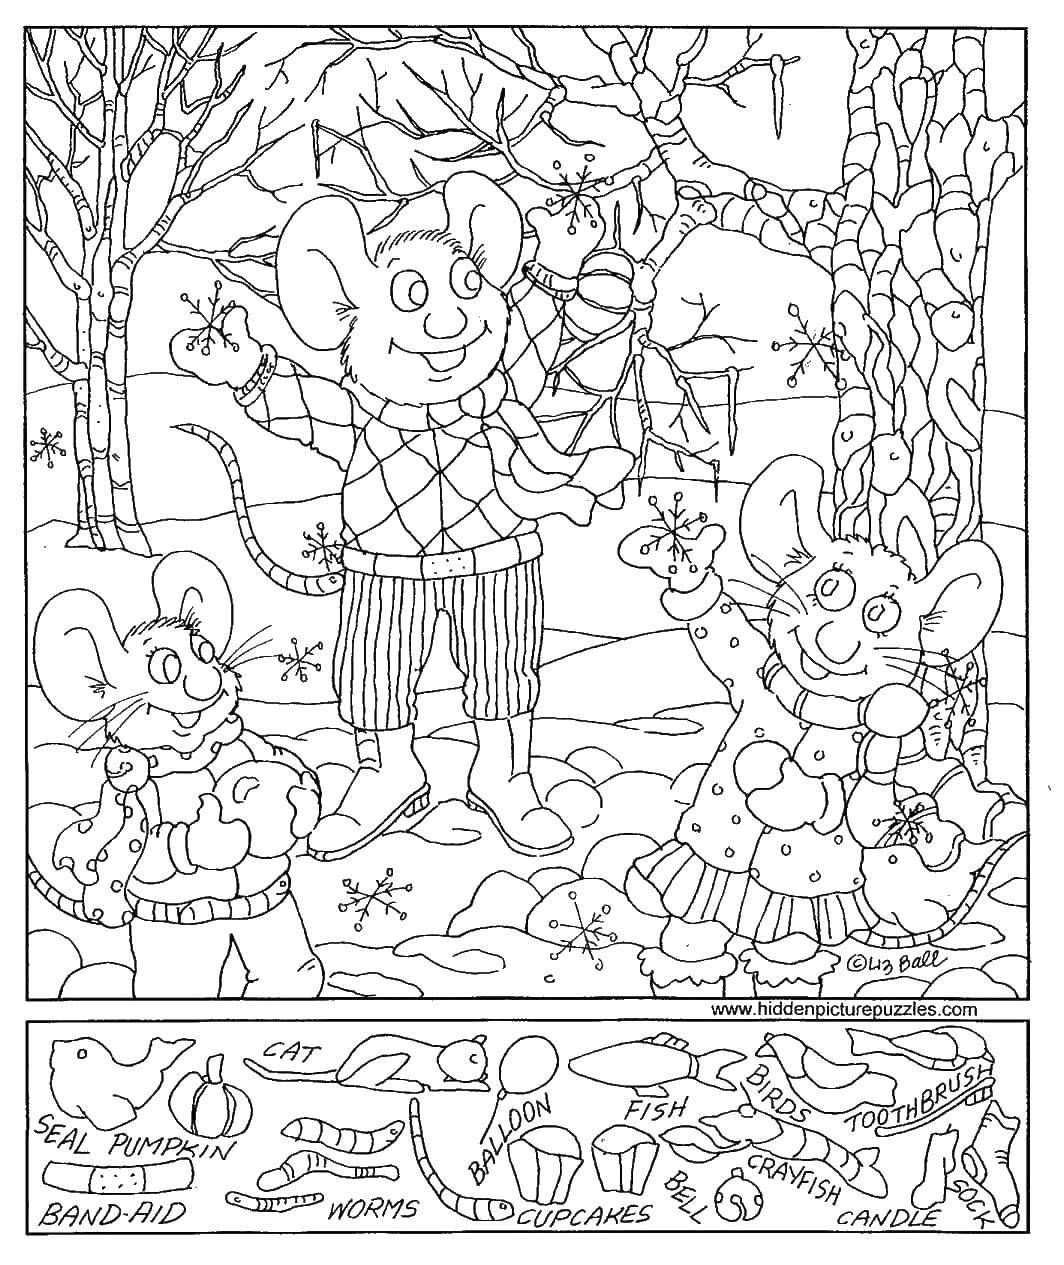 Coloring Mouse. Category Find what is hidden. Tags:  find hidden, objects, click.